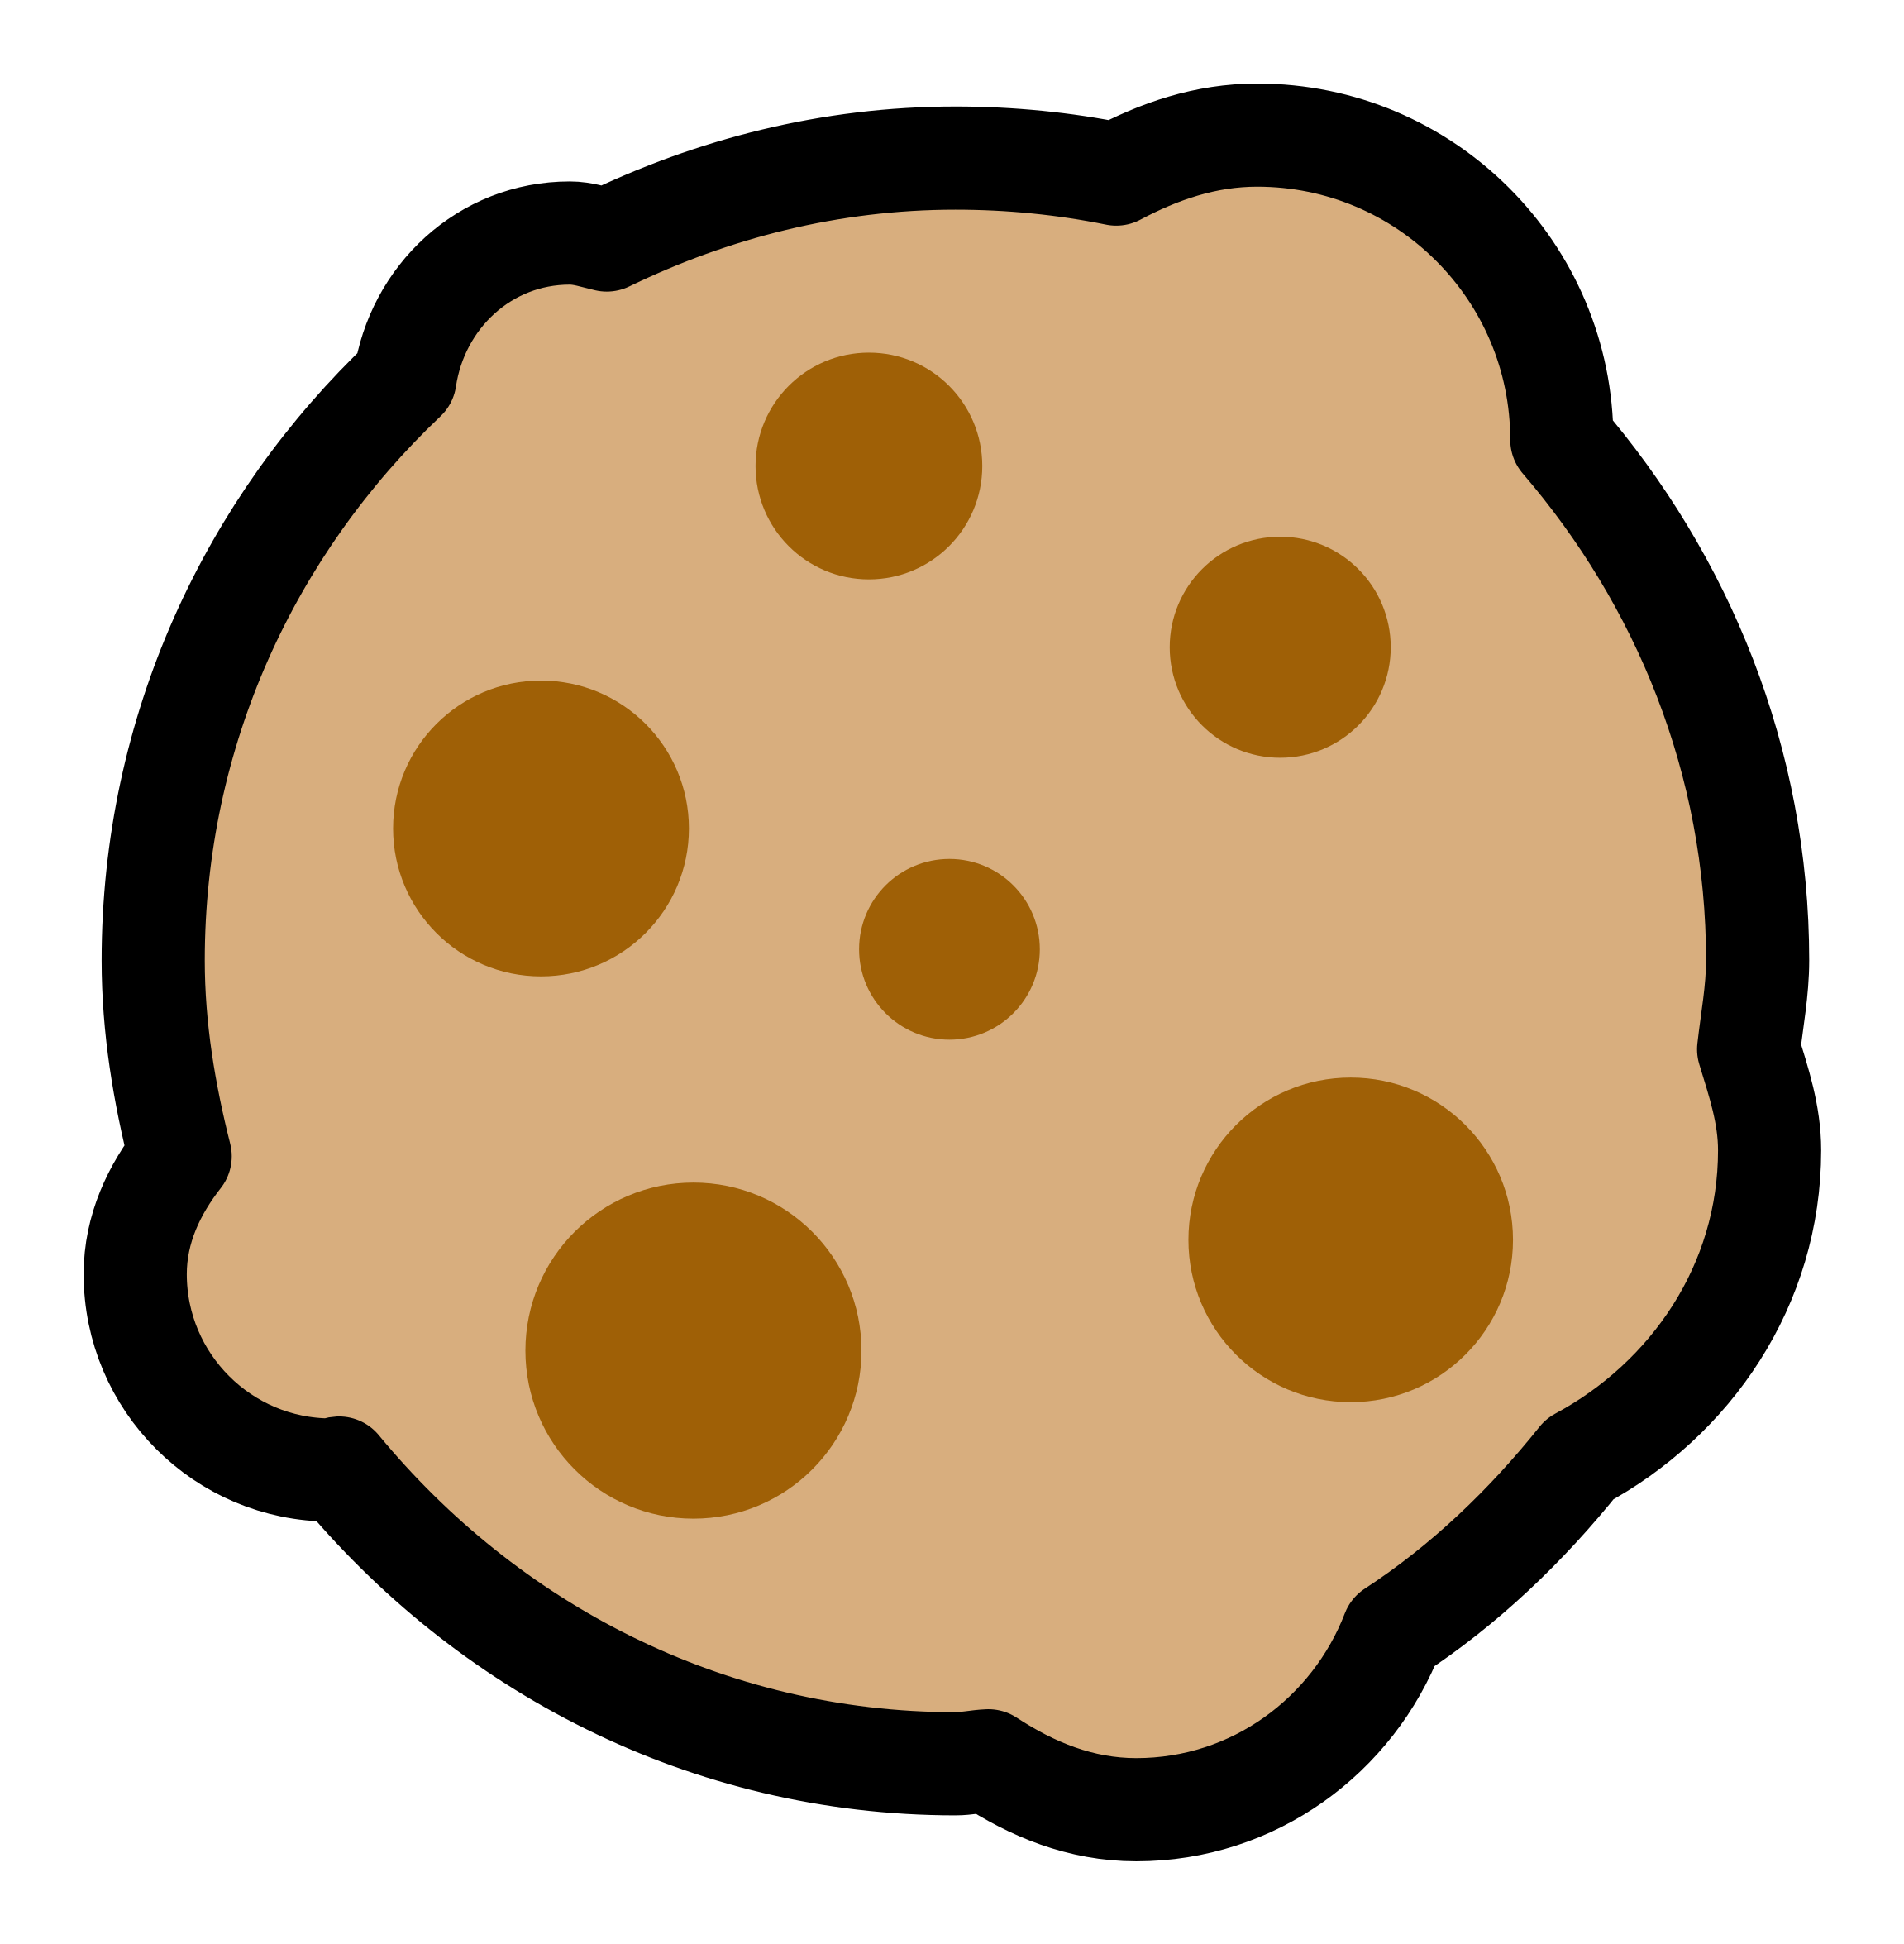 More From My Site - Cookie Pdf (2400x2400)